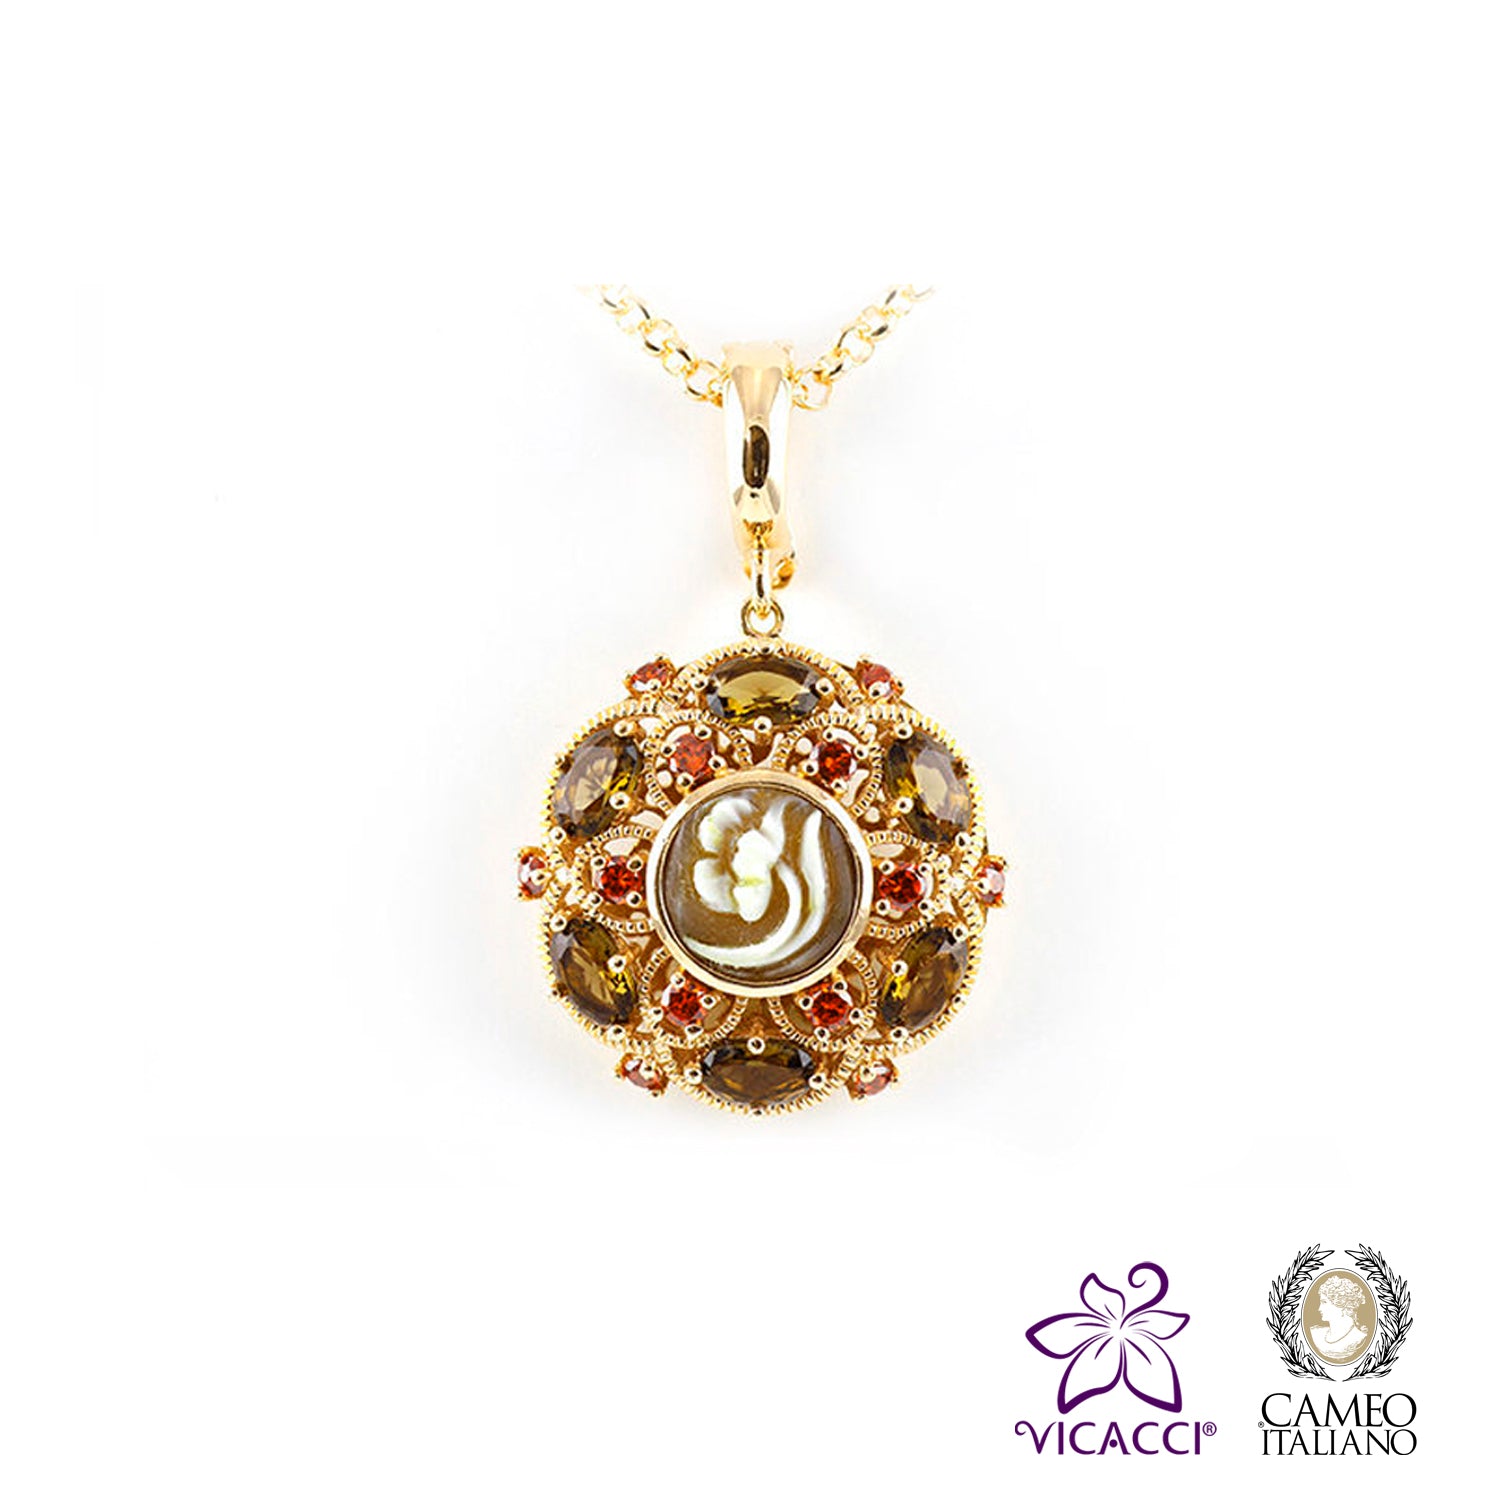 Cameo Italiano, P58 Pendant , Gold Plated Sterling Silver